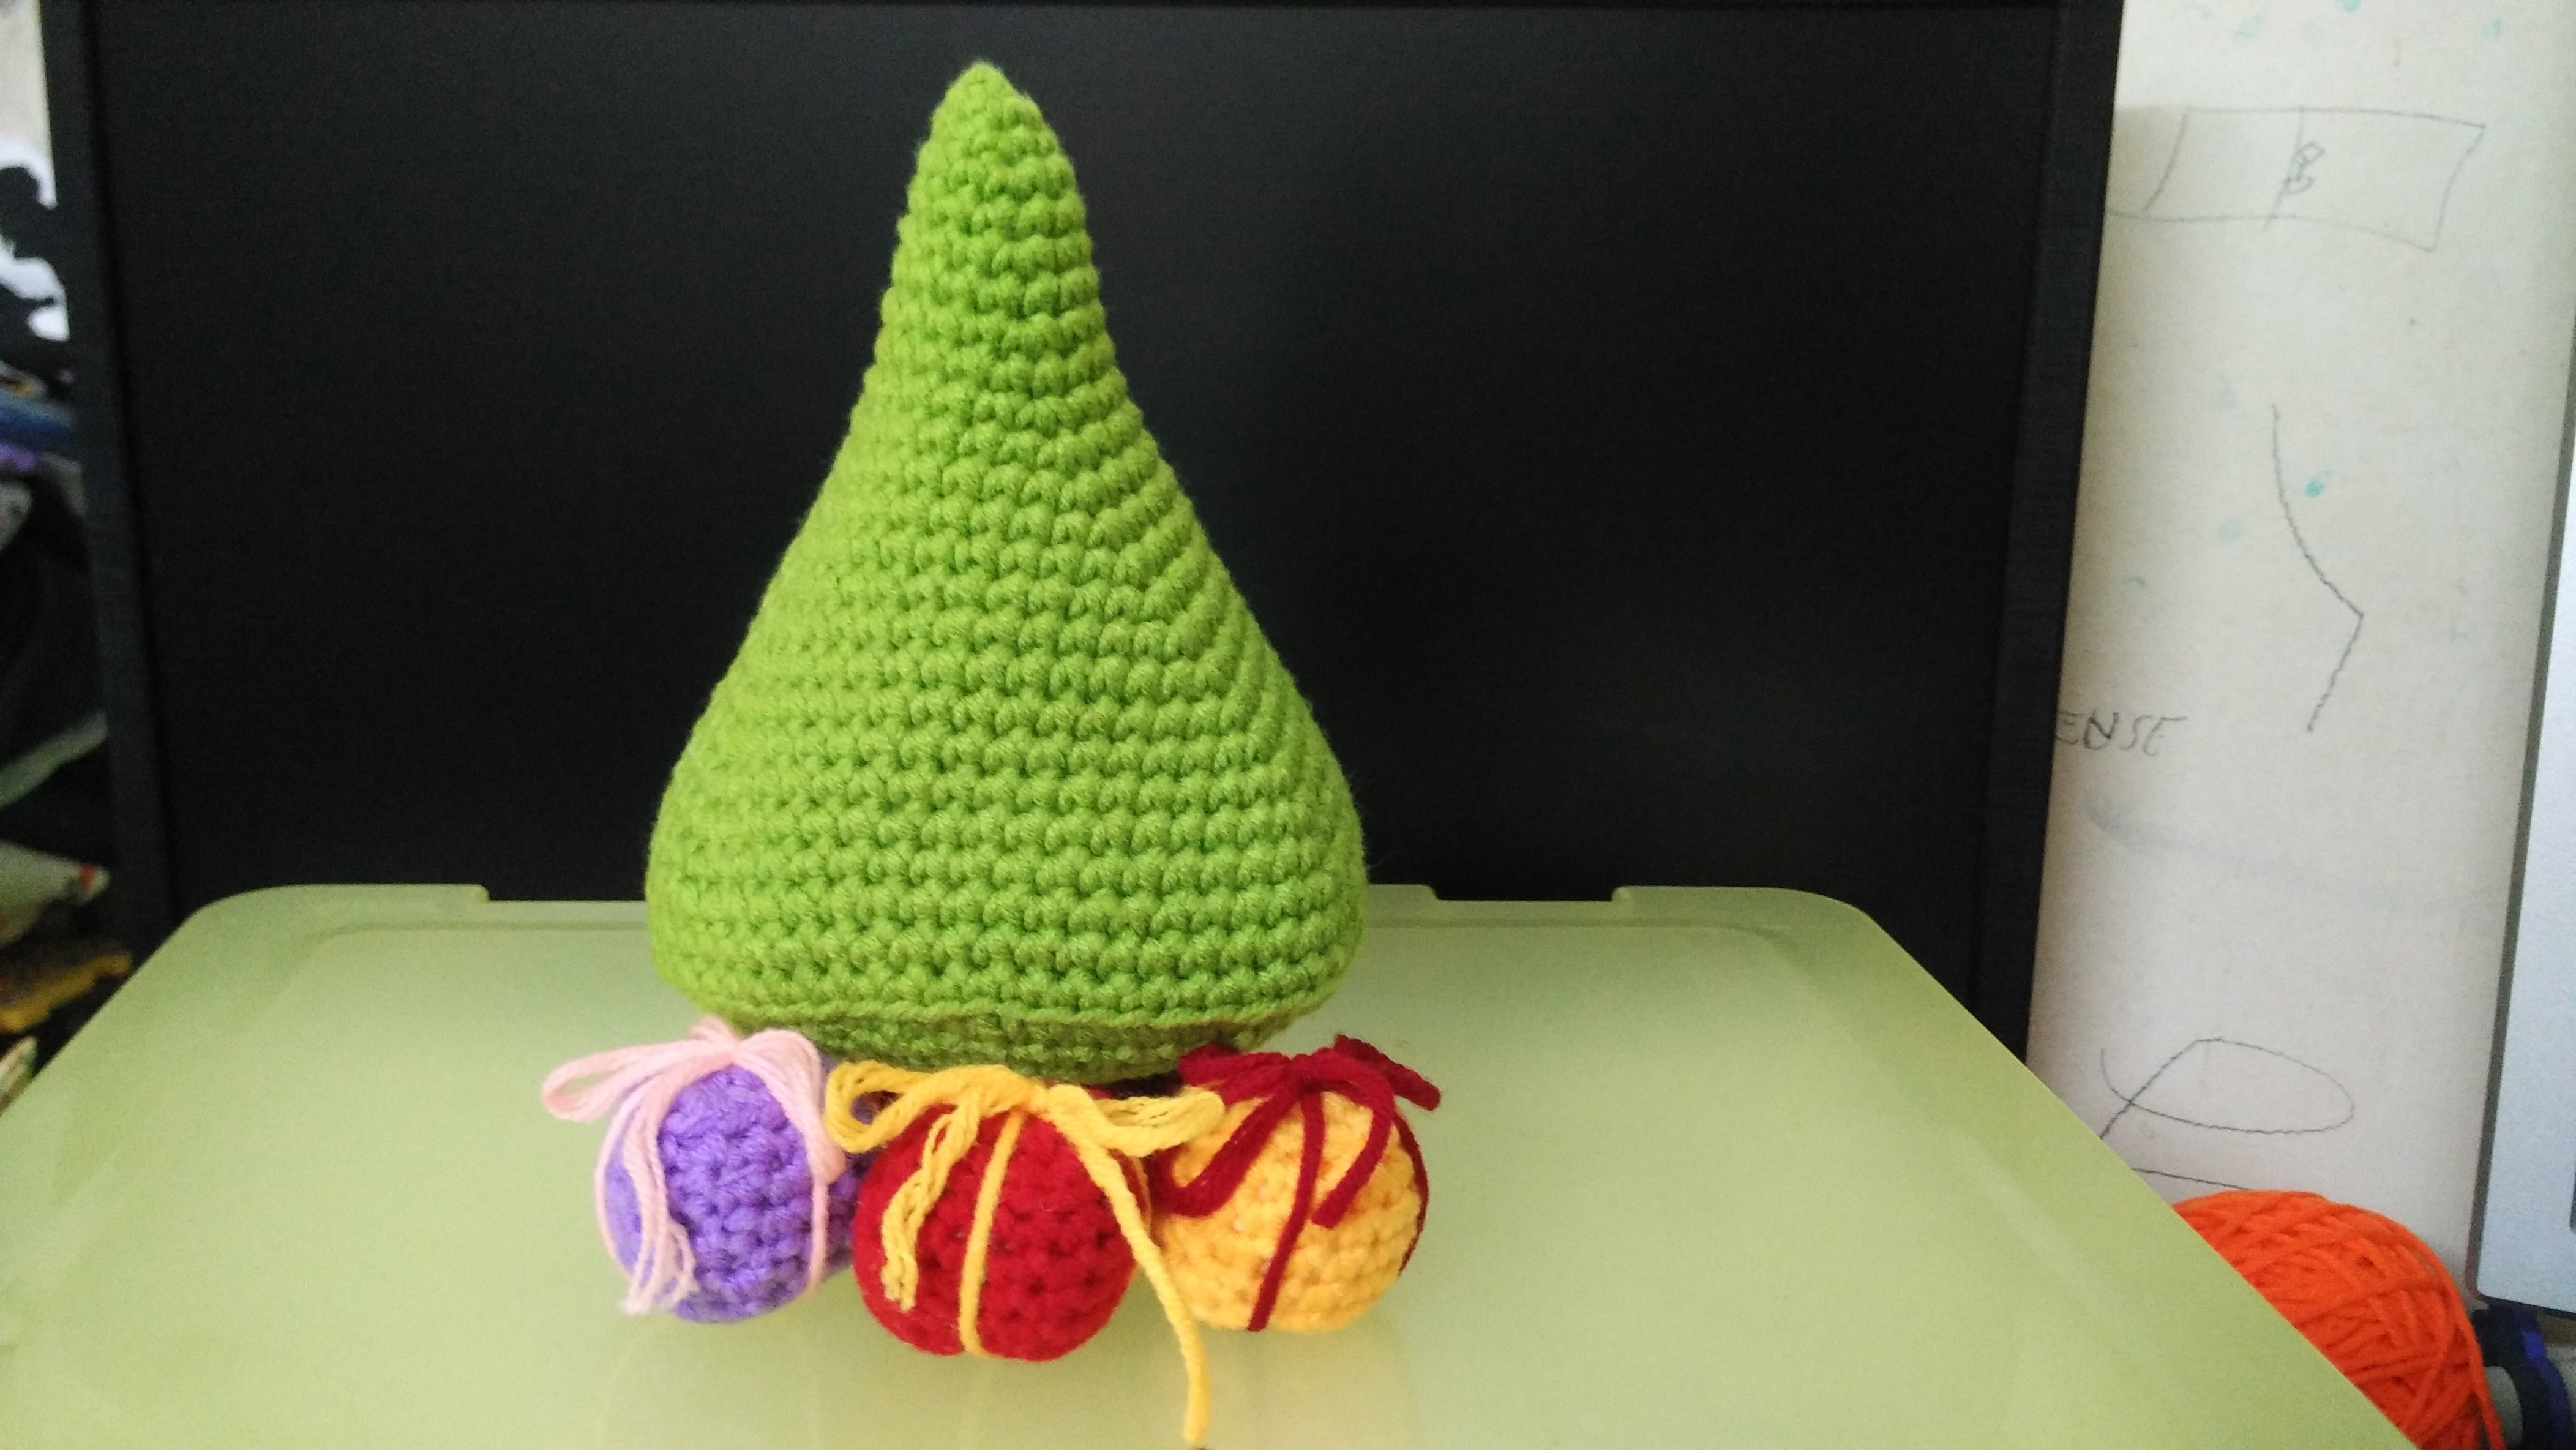 Crocheted Christmas tree and gifts